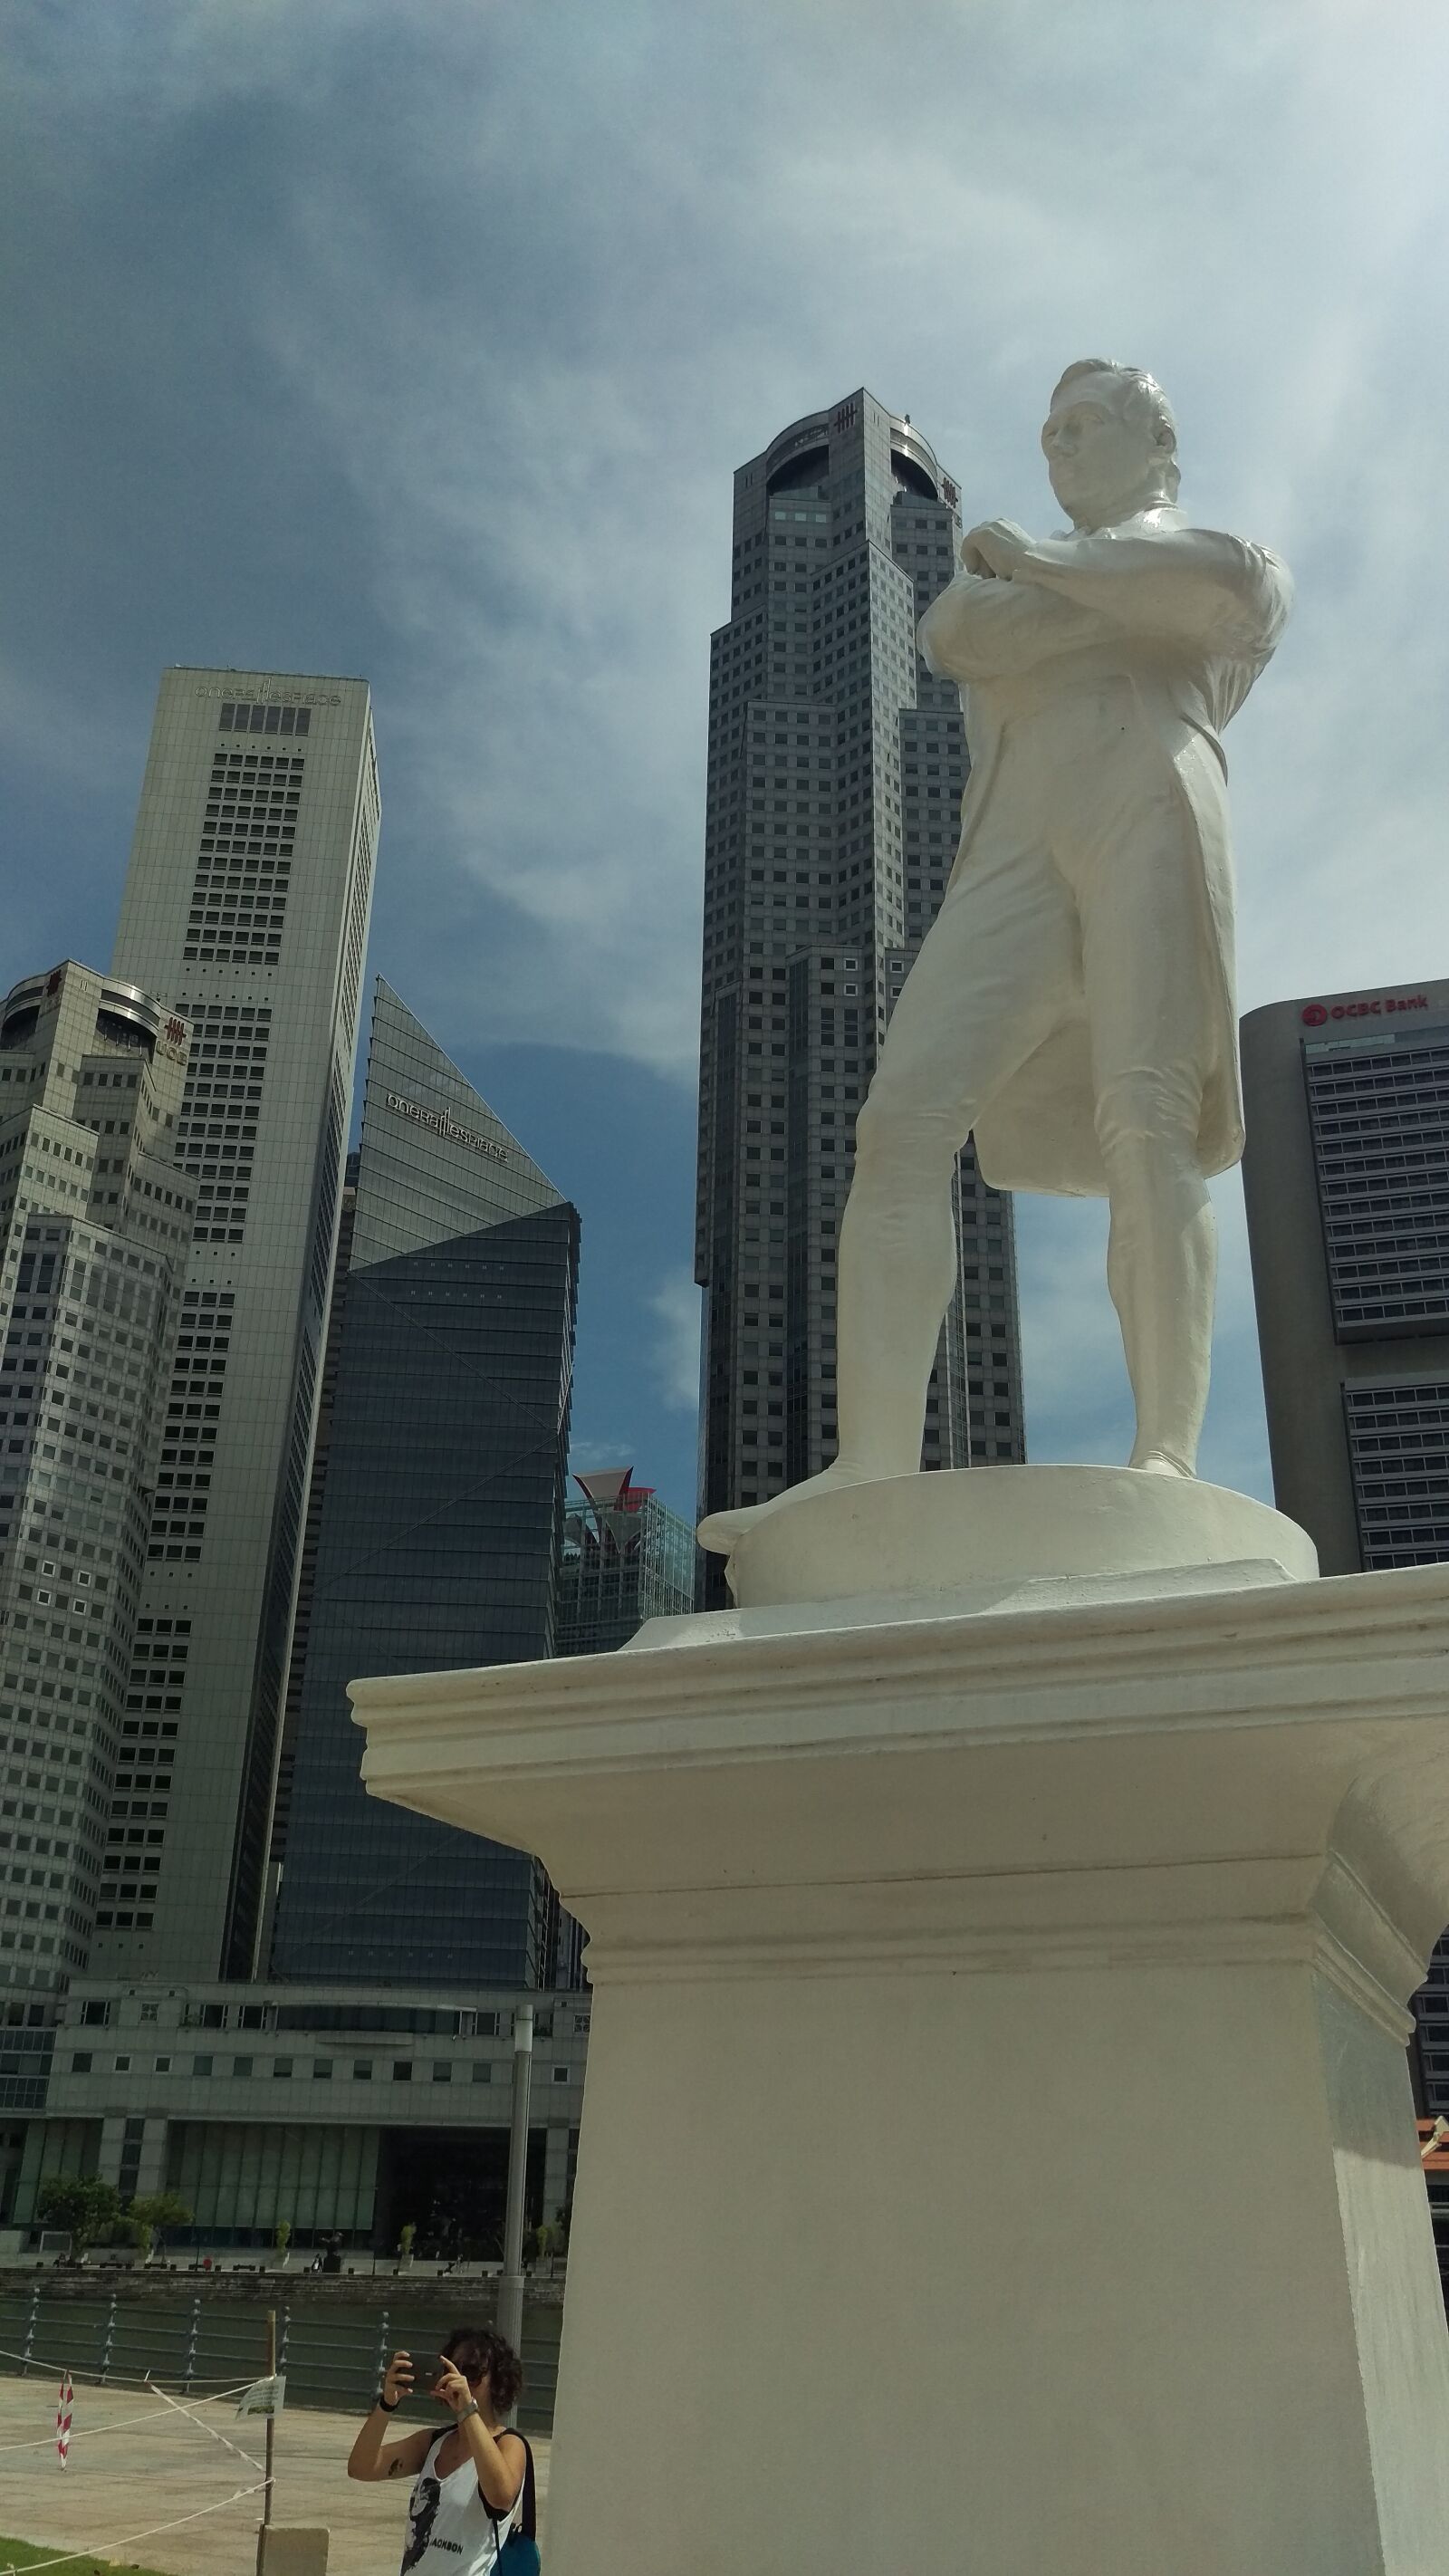 HTC ONE M9 sample photo. Cityscrapers, skyscrapers, statue photography